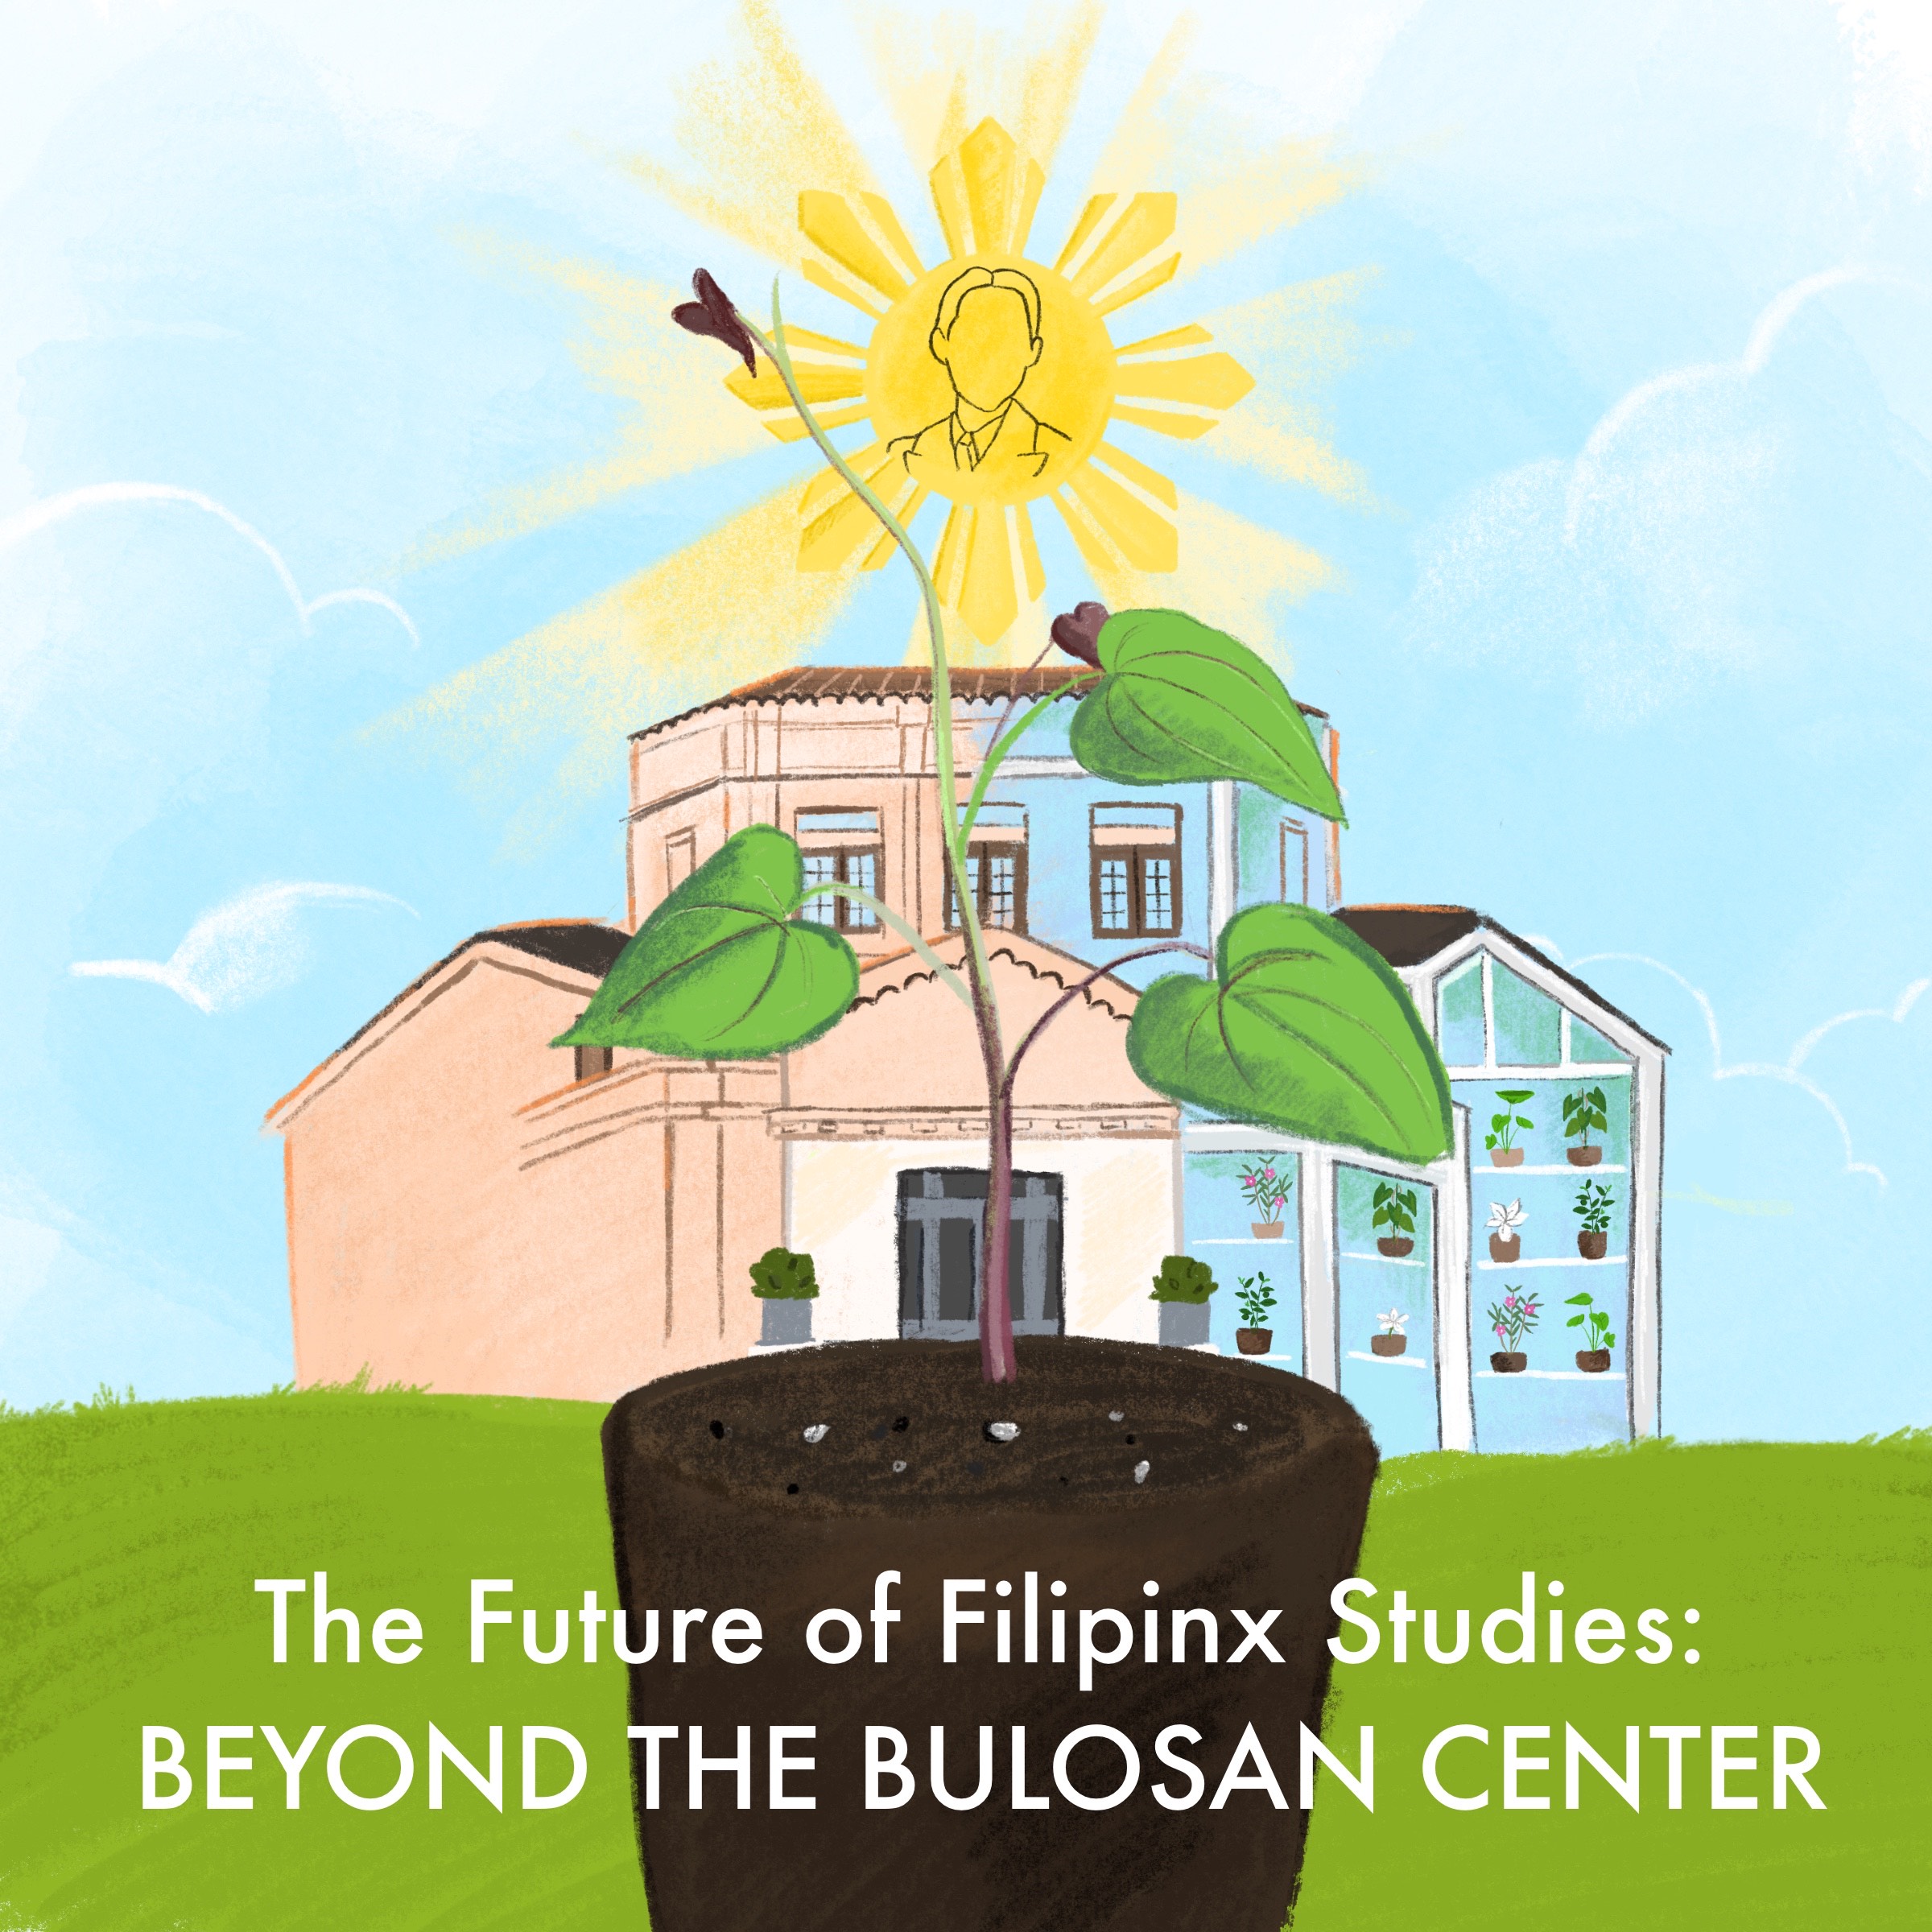 Hart Hall building transforming to a green house filled with Philippine native plants such as taro, ube, and aldelfa flower. In the middle is a ube vine plant. The caption is The Future of Filipinx Studies: Beyond the Bulosan Center. The background also has a blue sky with clouds and the sun on top is the Philippines sun symbol with the Bulosan Center logo.